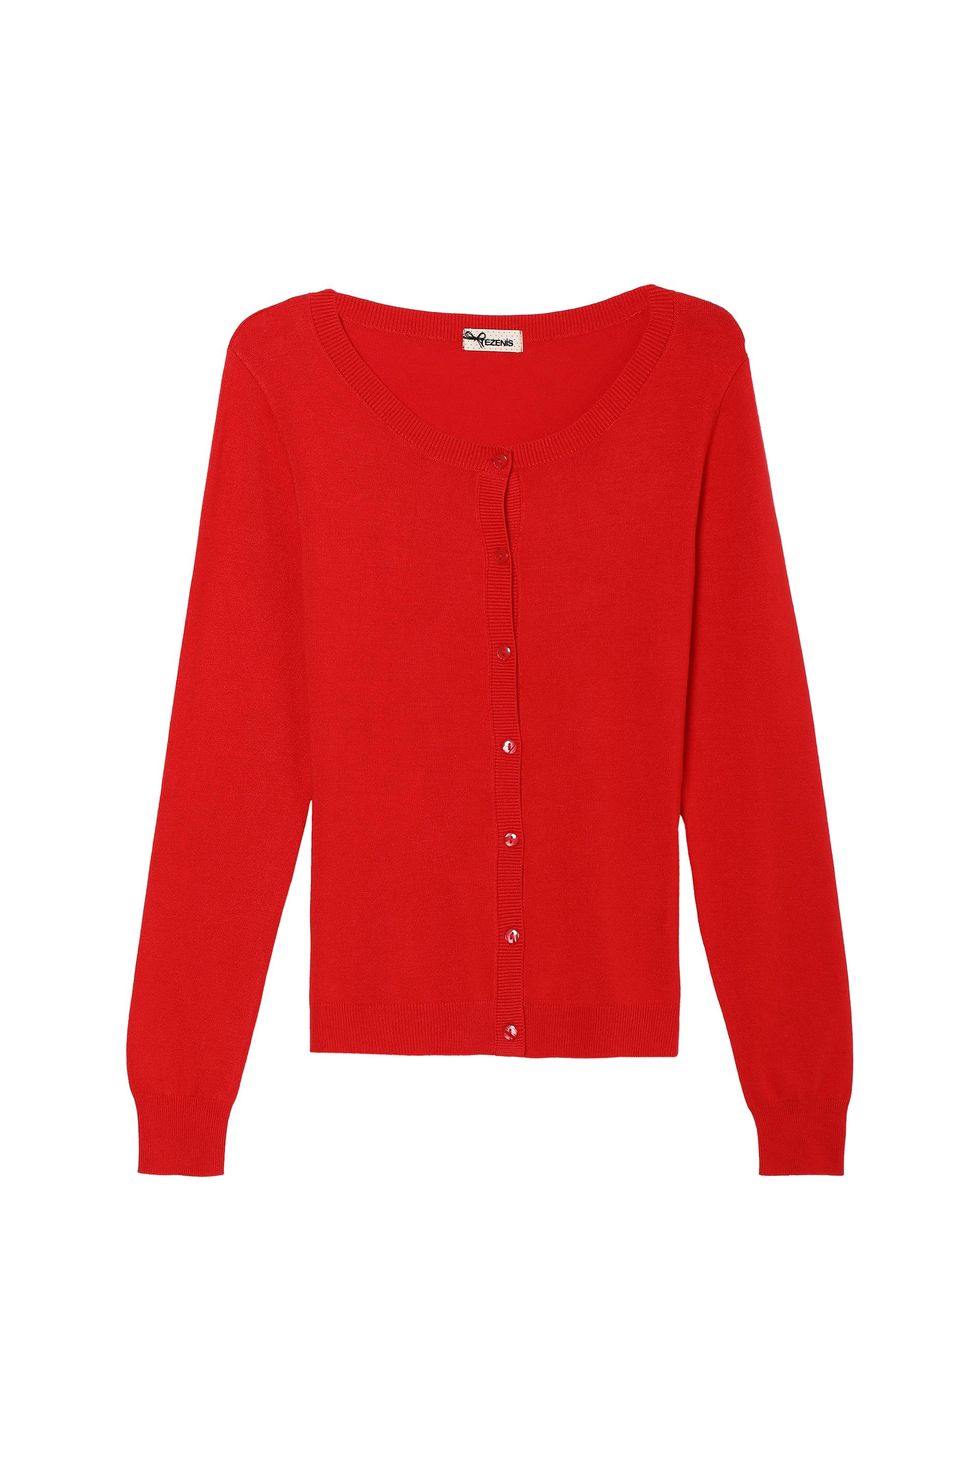 Clothing, Red, Sleeve, Outerwear, Sweater, Cardigan, Top, T-shirt, Blouse, Neck, 